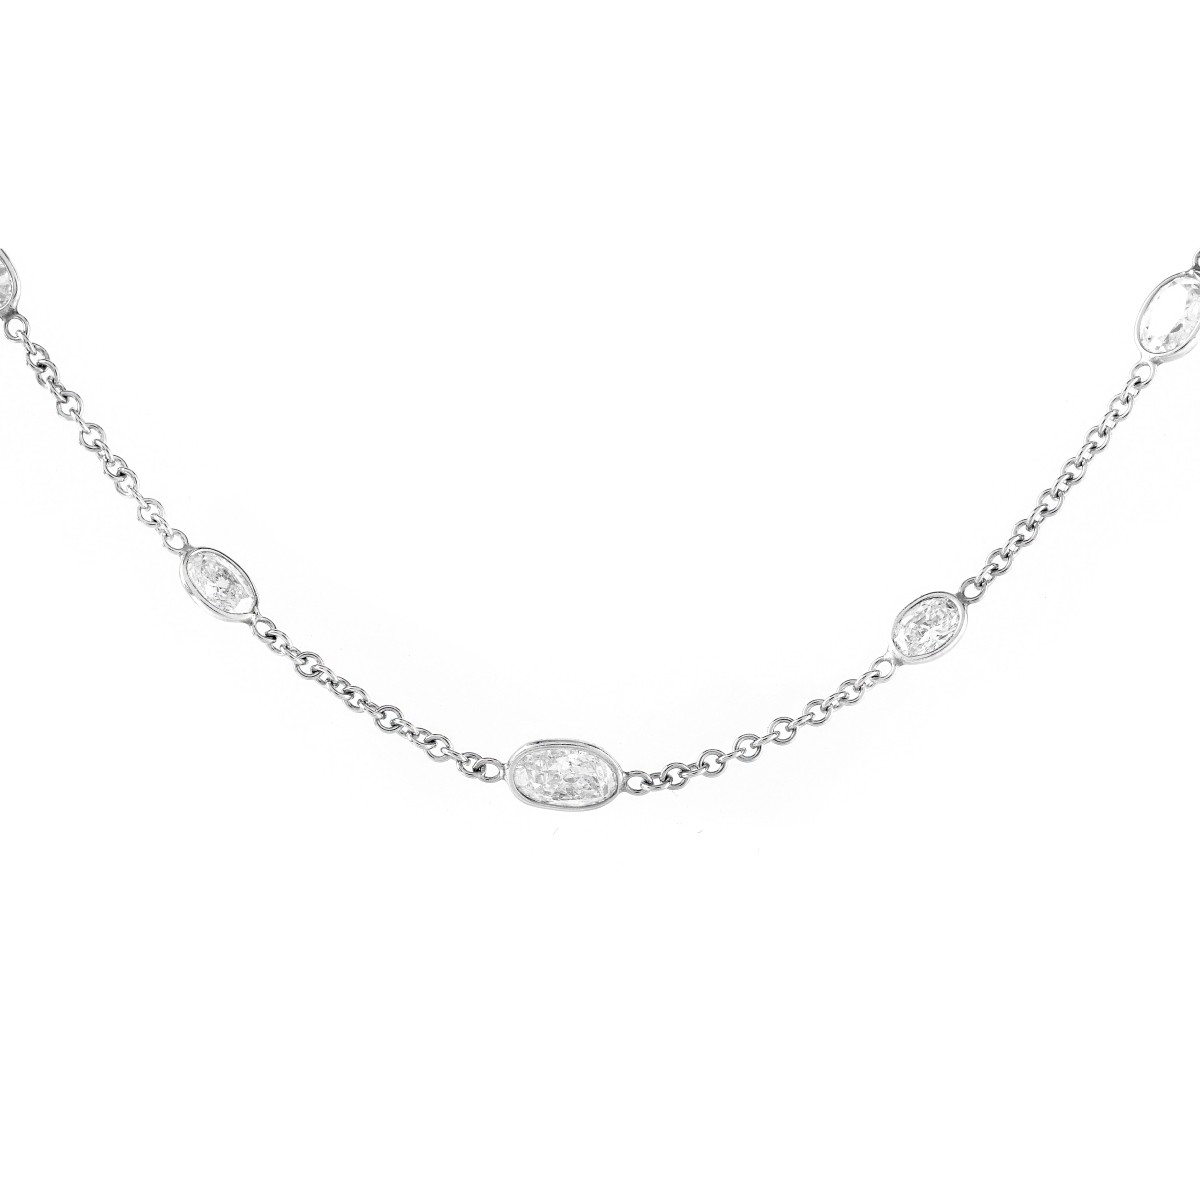 36" Long Diamond and 18K Gold Necklace